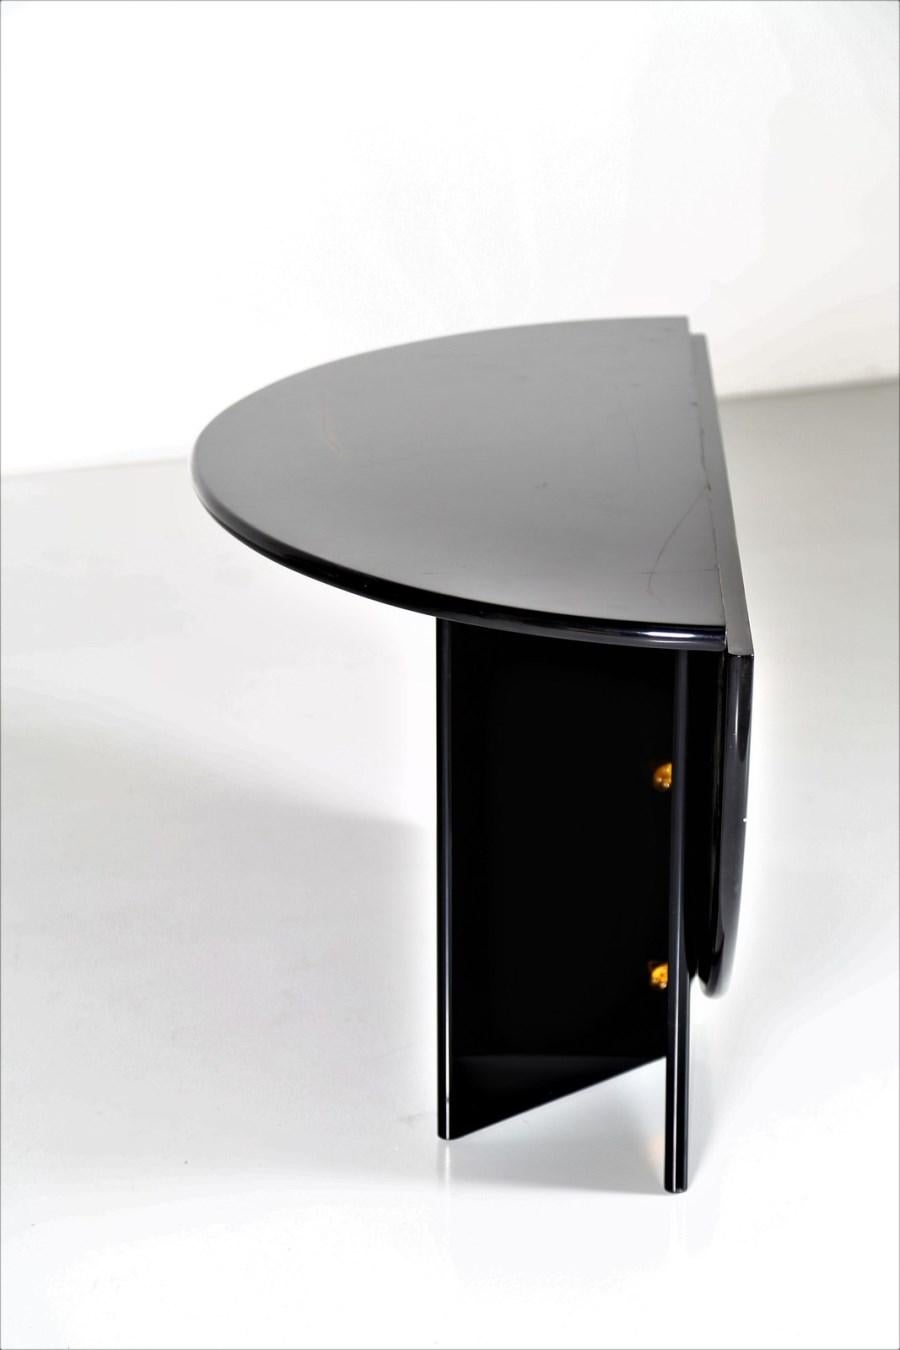 Table / Antella by Kazuhide Takahama for Simon Gavina, 1980s. The table folds in half and can be used as a console. The oval top has some signs of use. When the table is open the top has a footprint of 122 cm x 170 cm, when folded 170 cm x 61 cm.